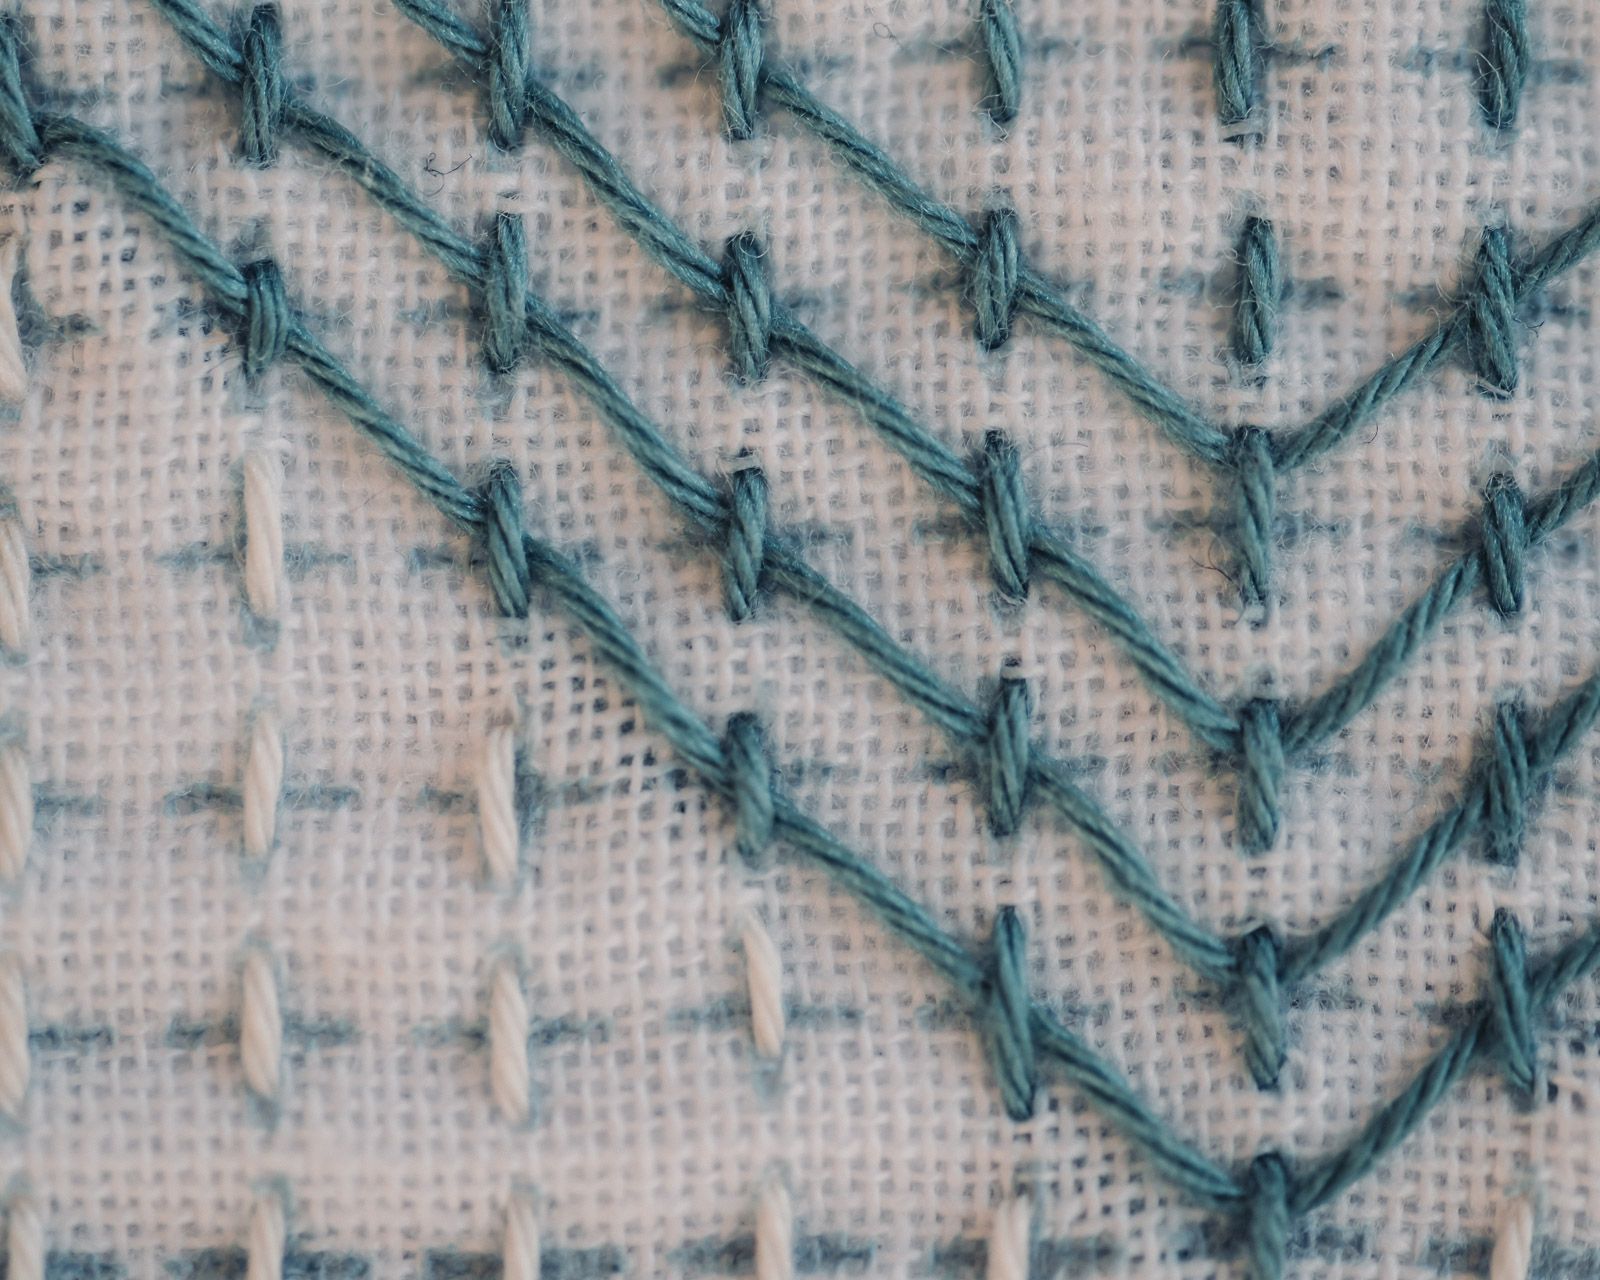 Sashiko stitches on white cloth close up with visible grid lines.